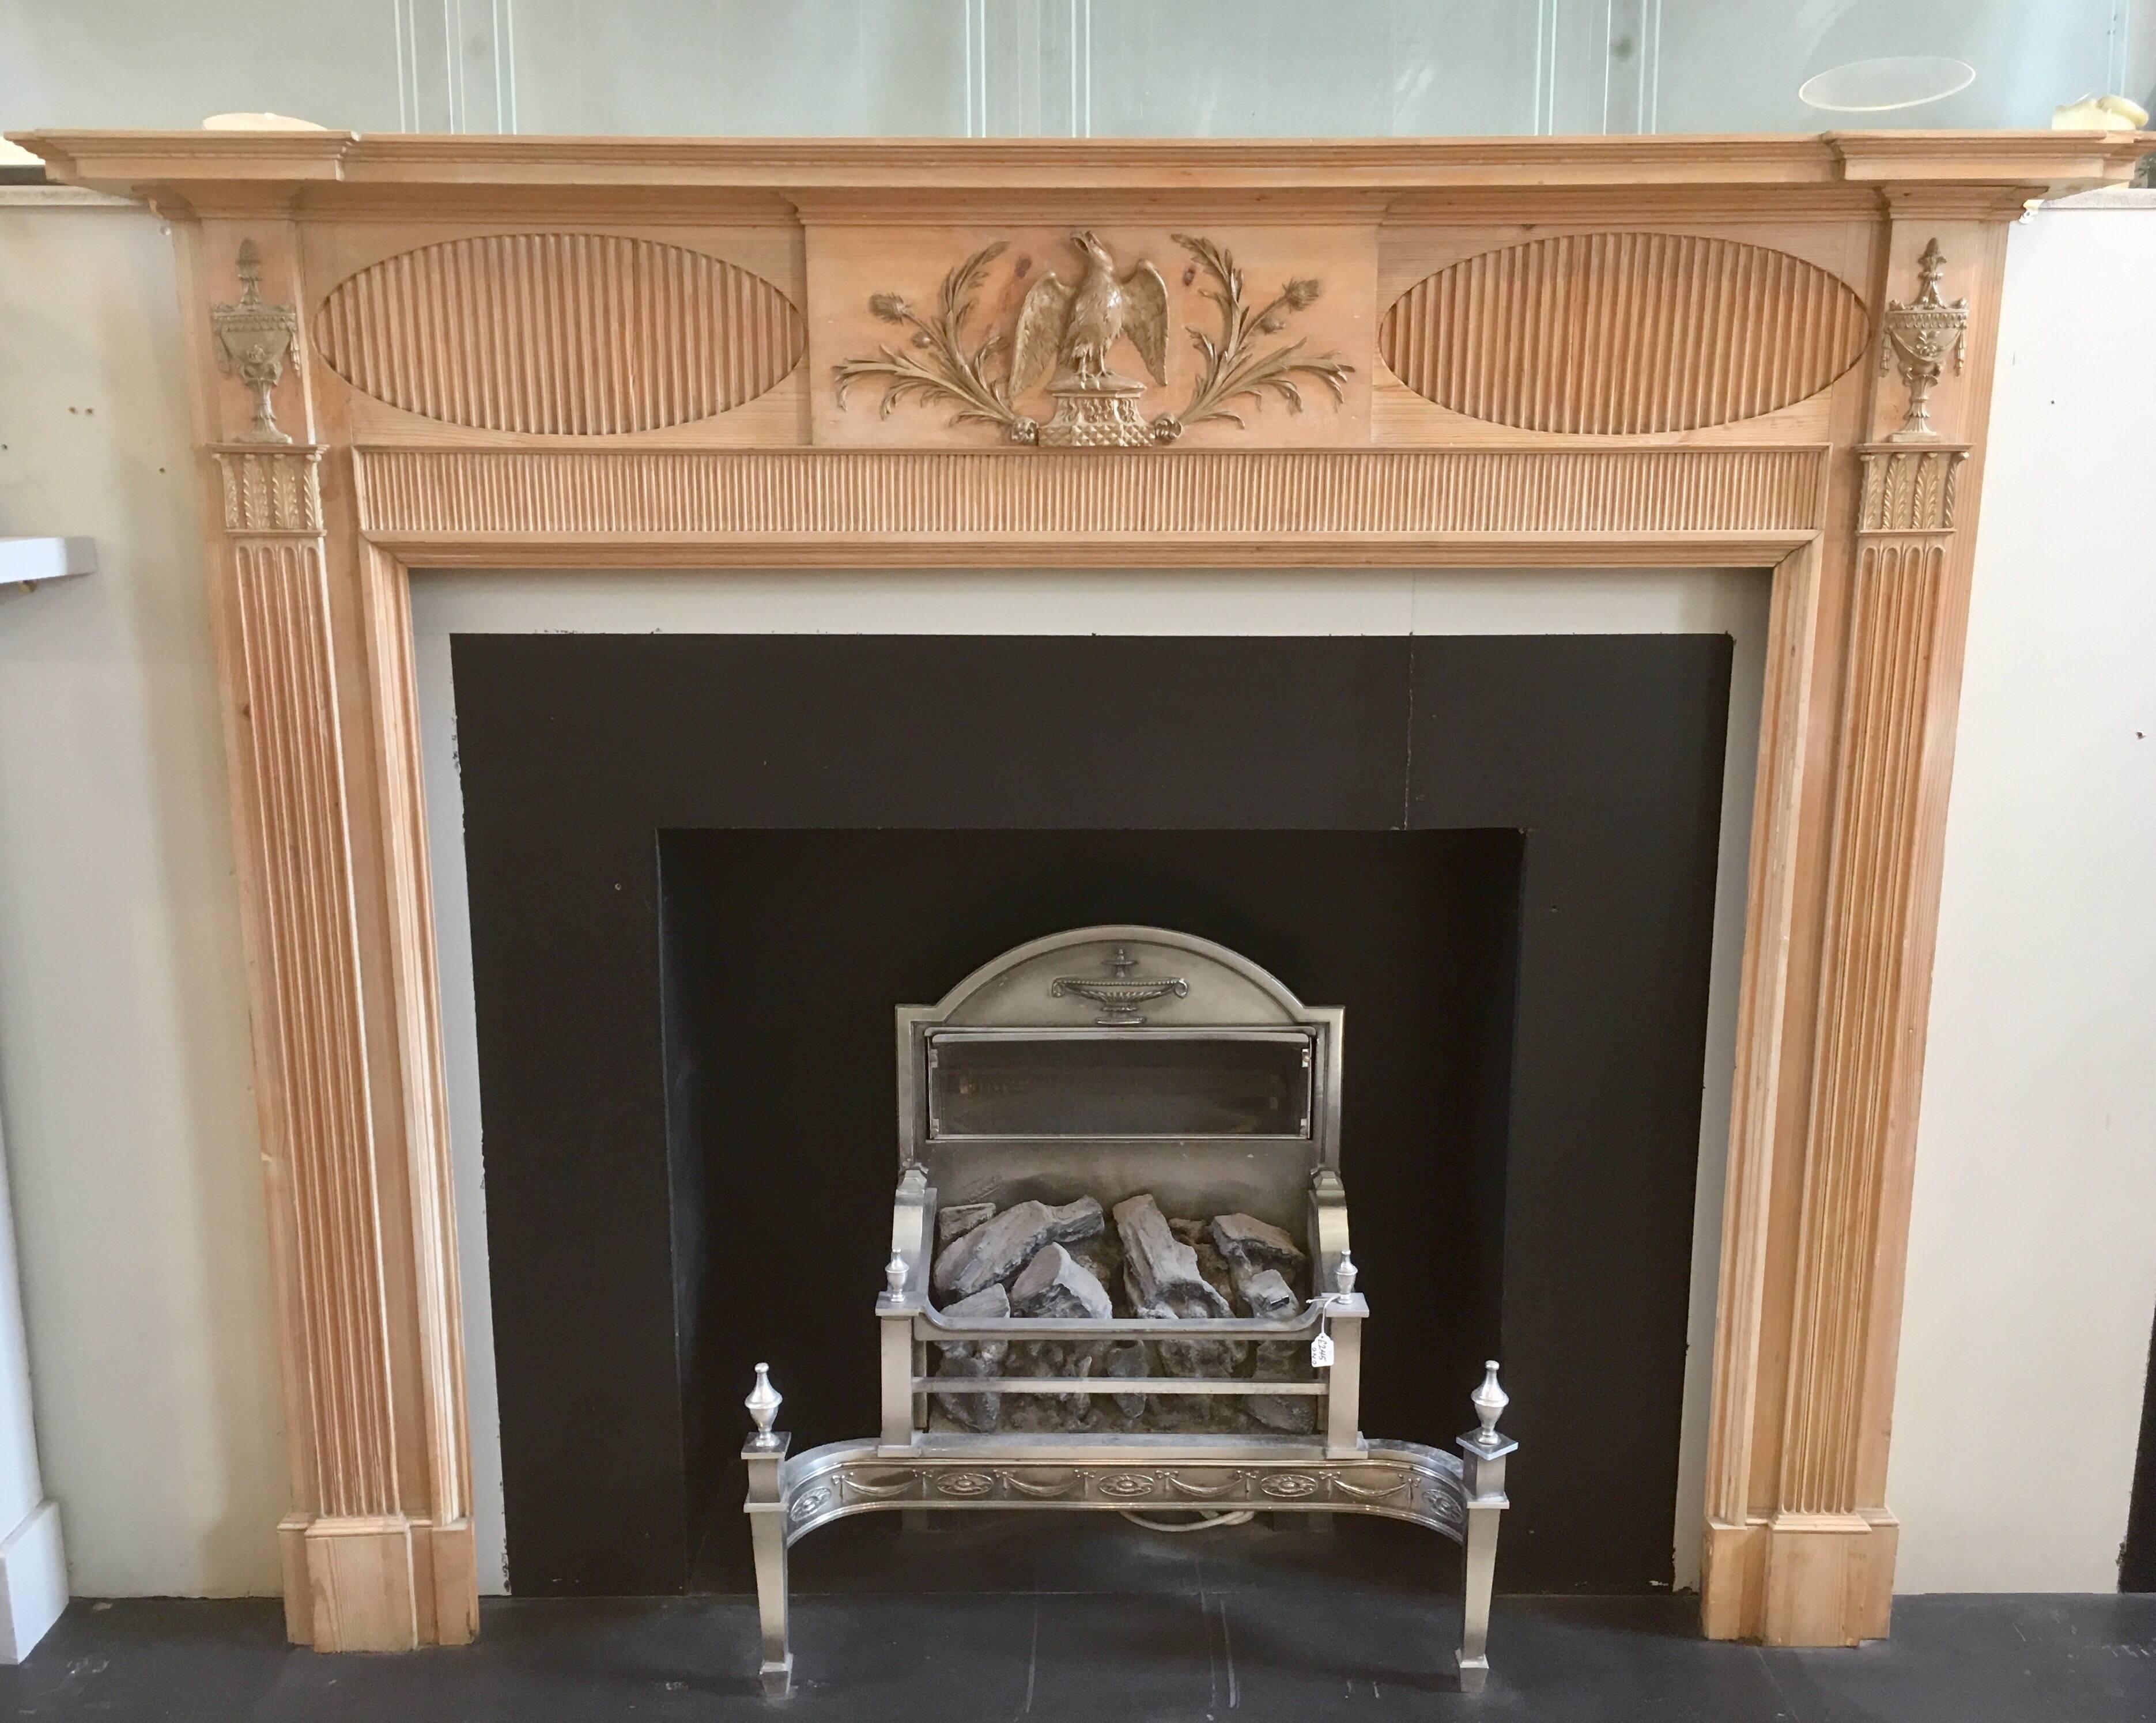 A charming early 19th century Antique Pine & Gesso Georgian timber fireplace surround salvaged from Edinburgh's historical New Town. A breakfront and moulded shelf sits above a a frieze with a central tablet hosting an open eagle with tendrils of